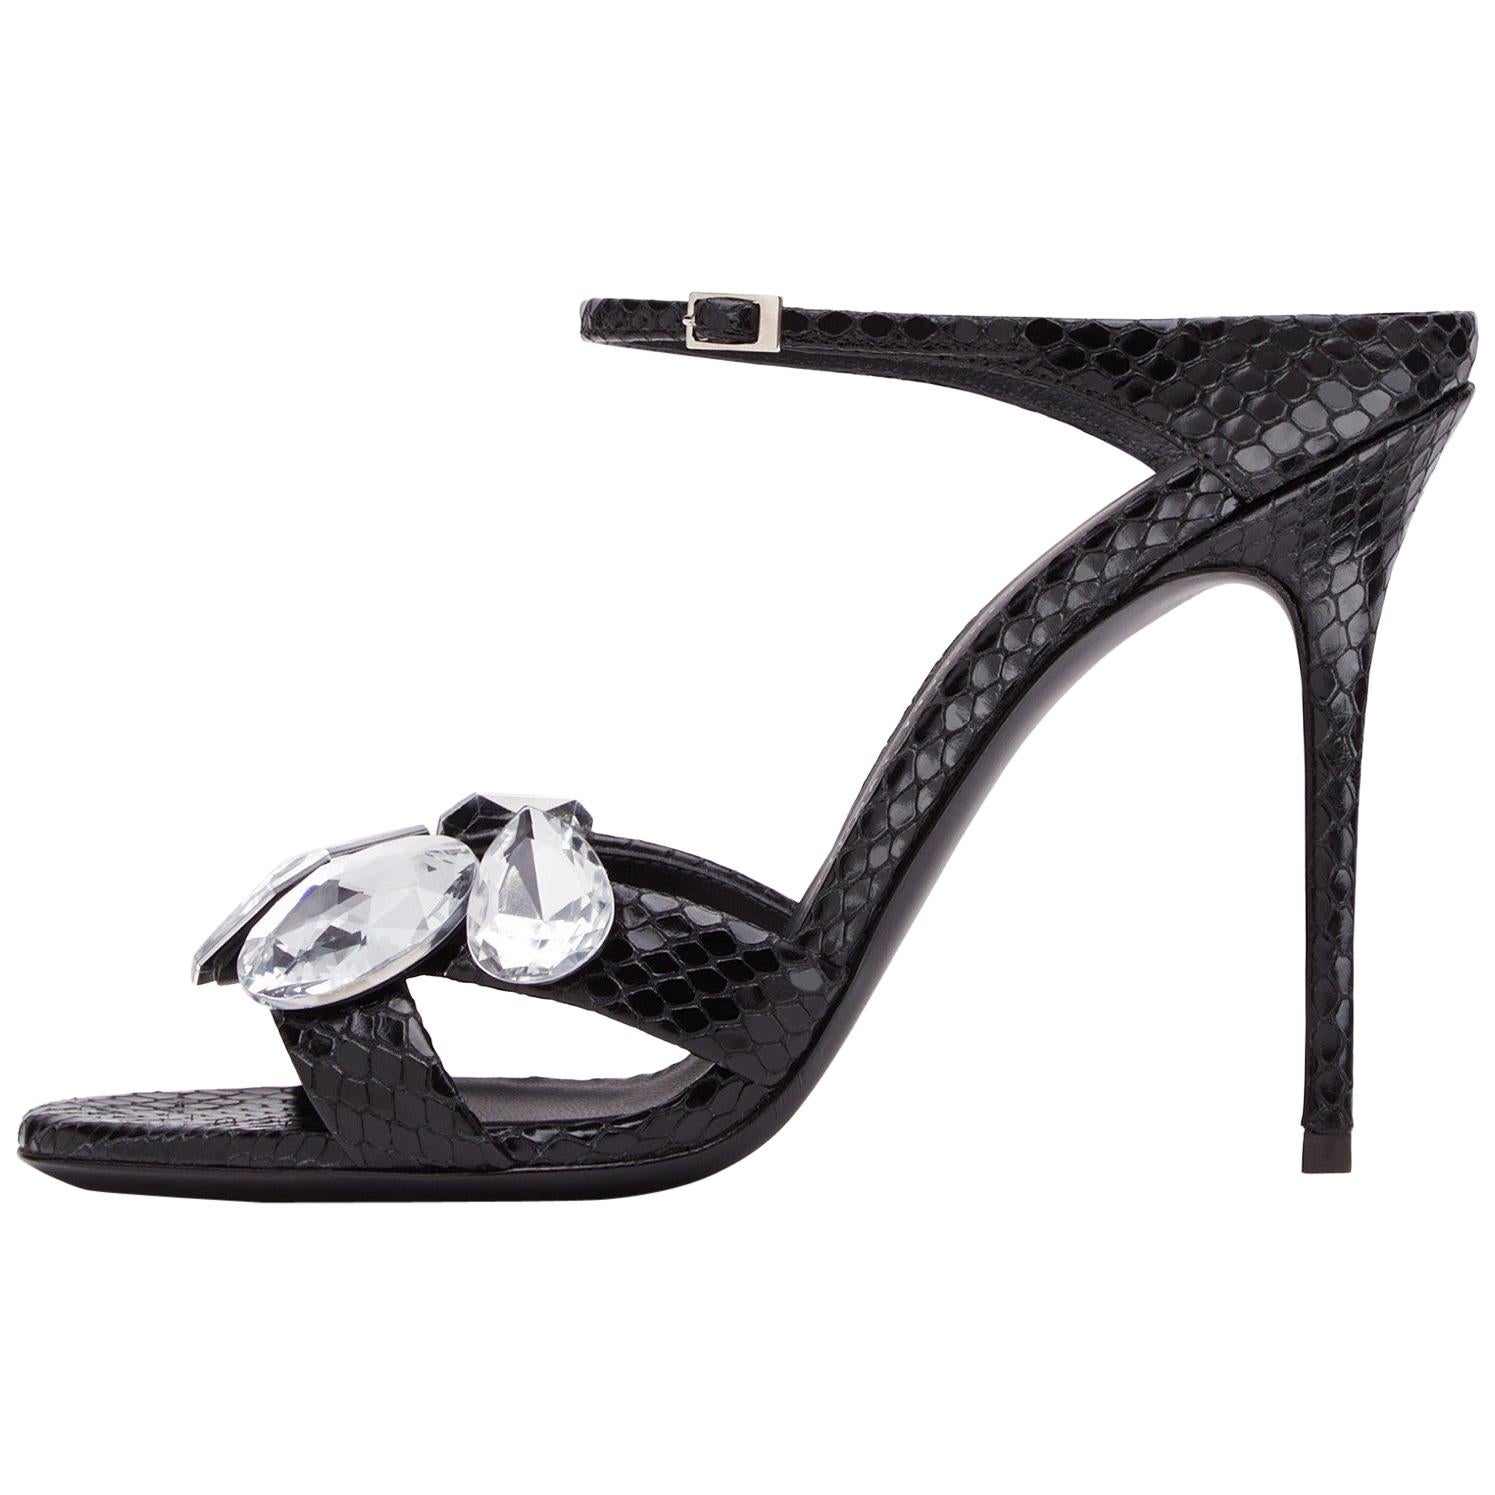 Giuseppe Zanotti NEW Black Leather Crystal Evening Slide In Mules Heels in Box